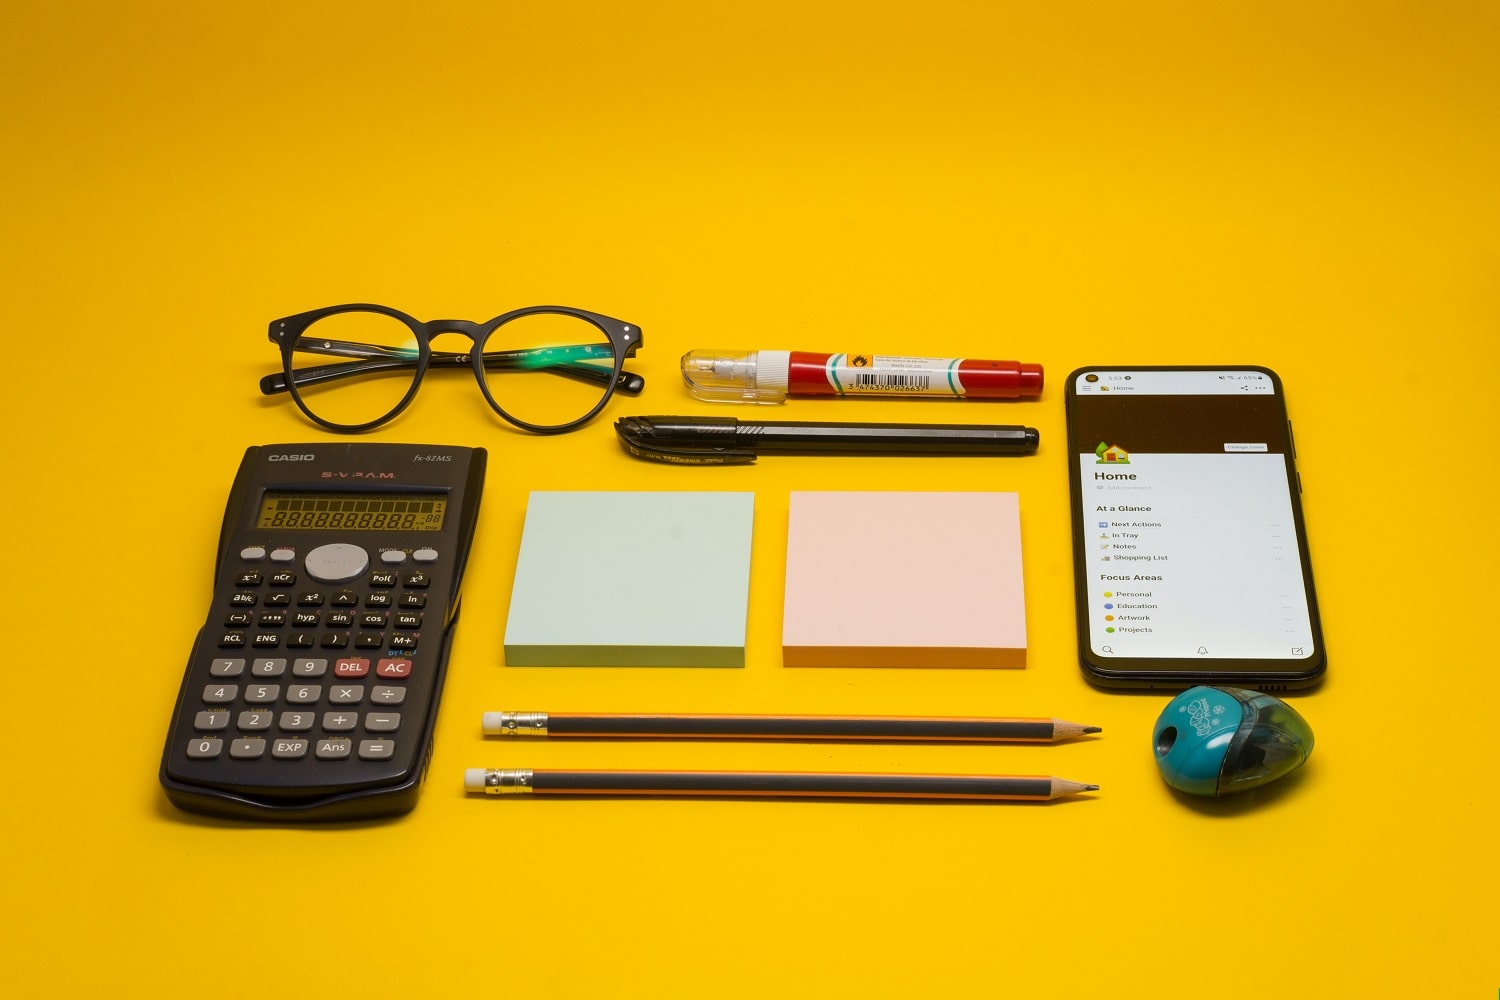 A calculator, notepad, pencils and a pair of reading glasses, tools used to help calculate Amazon return on investment.